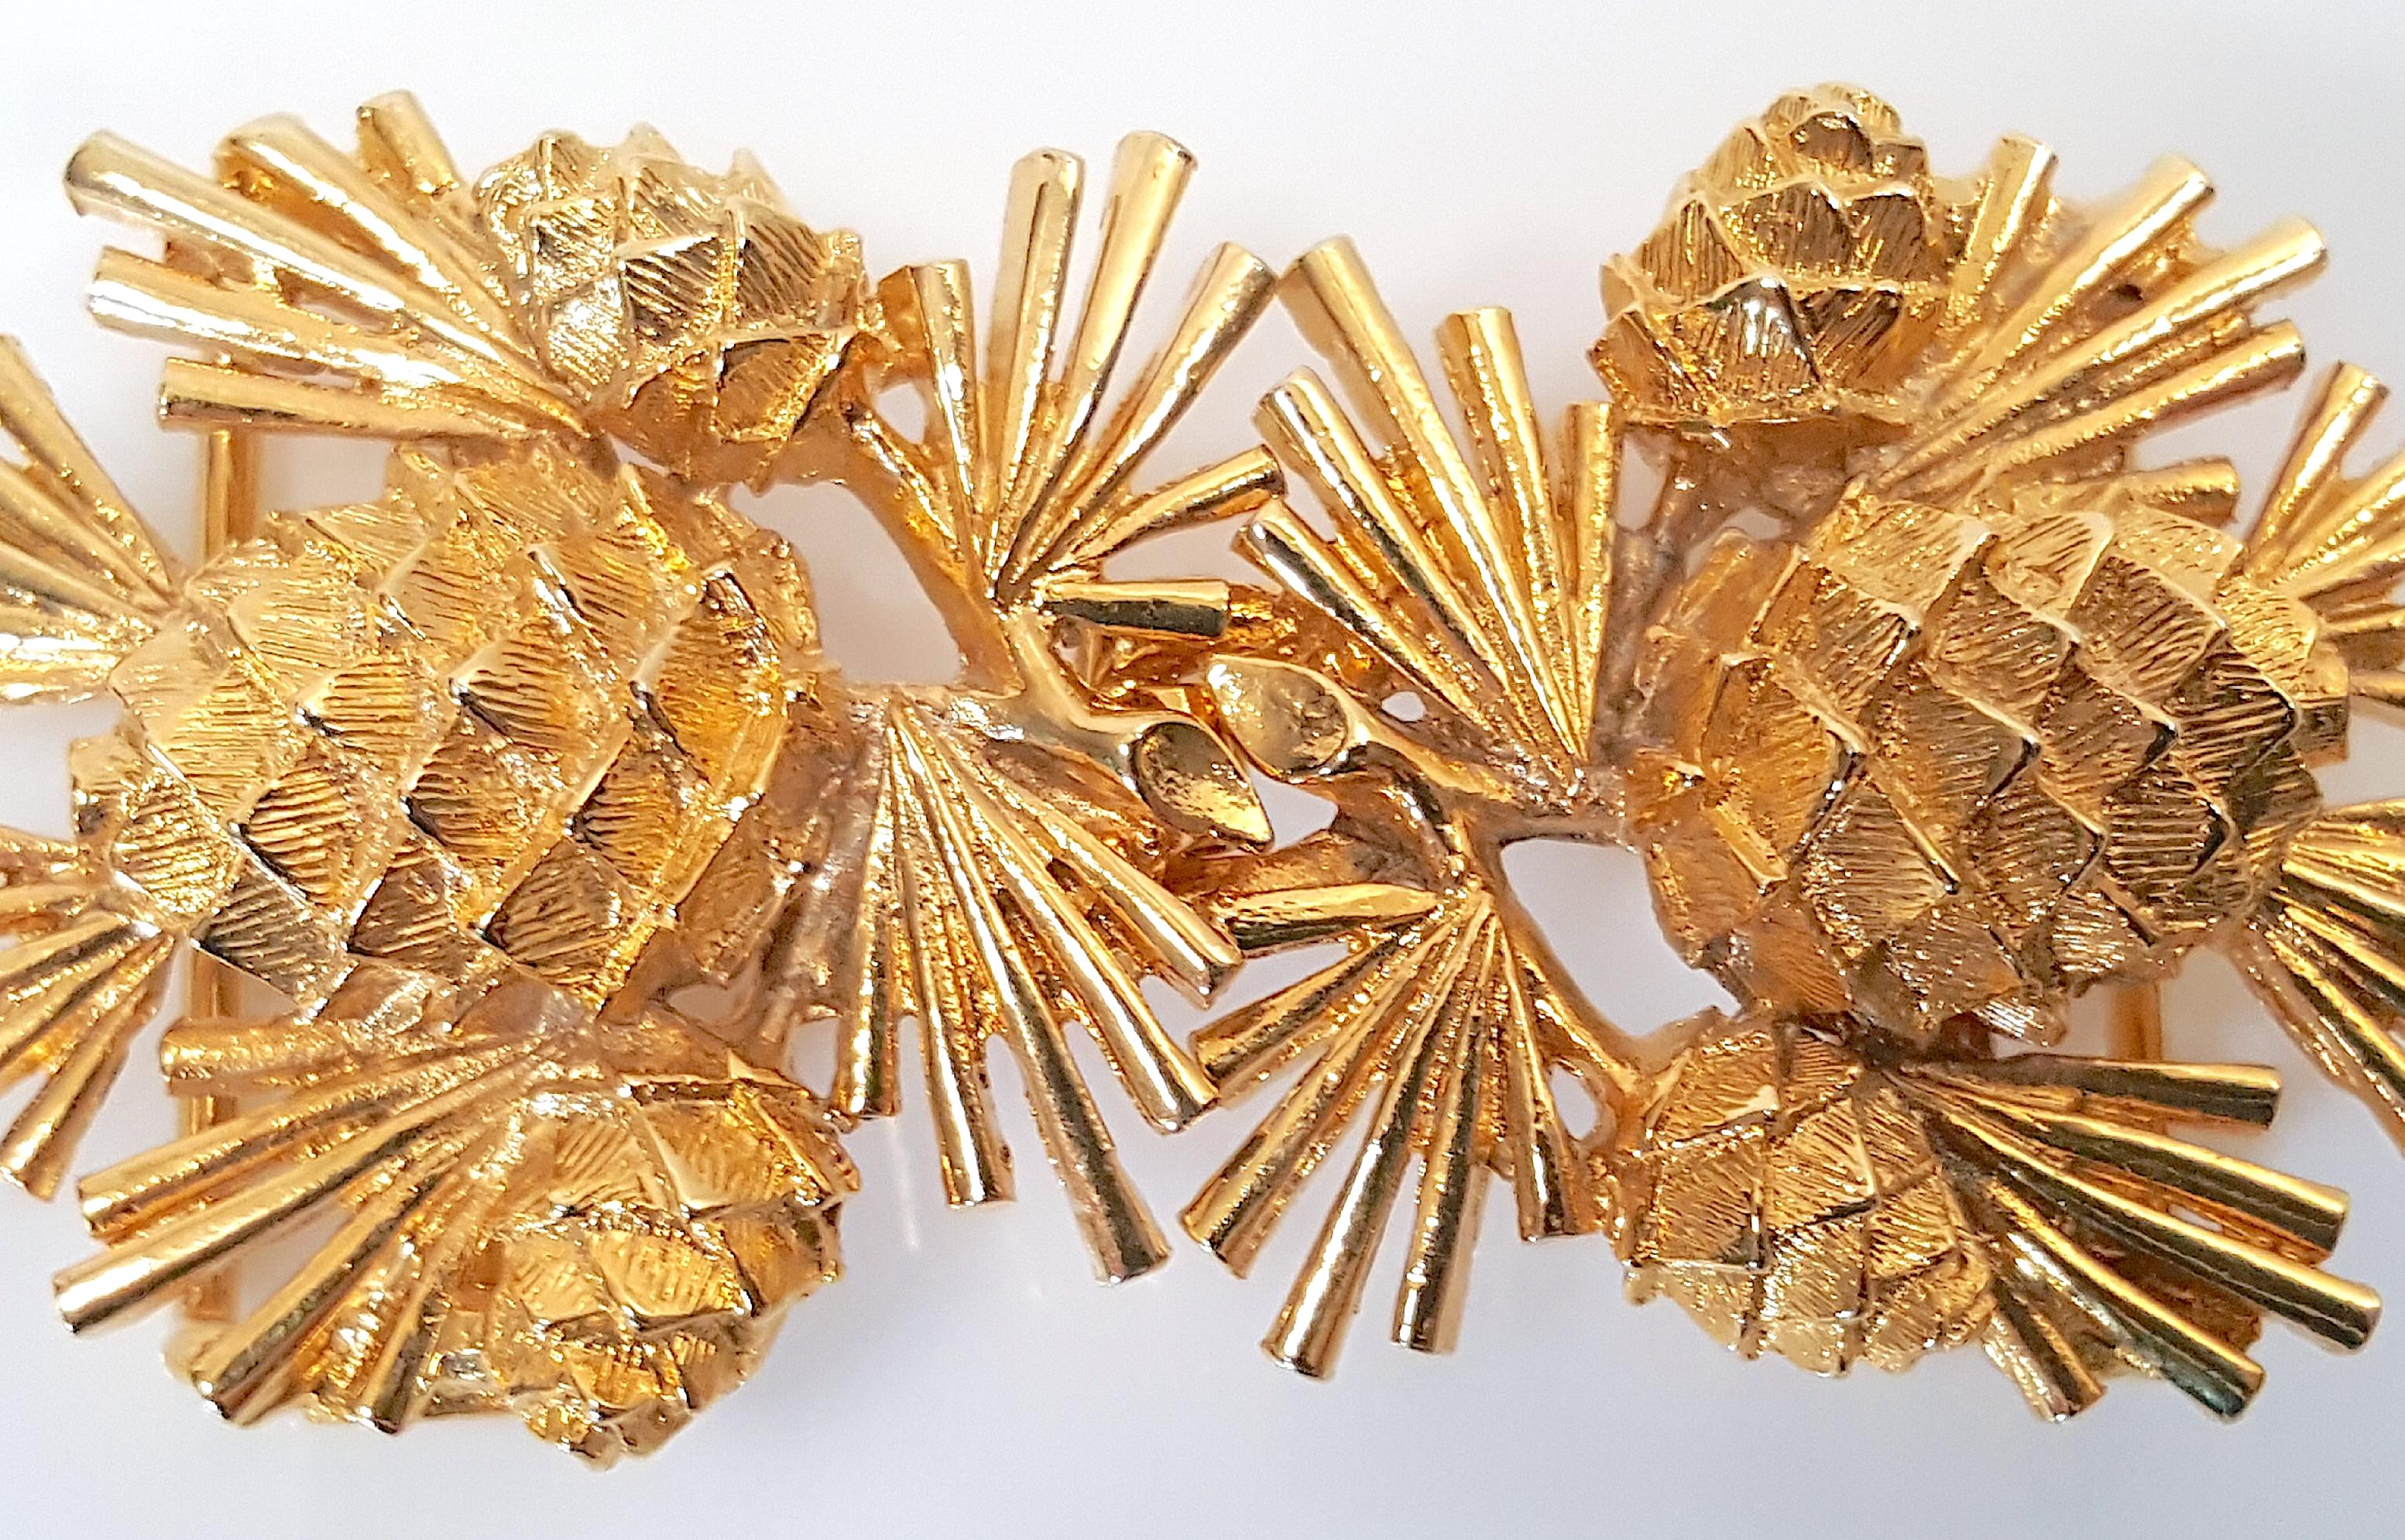 This curvilinear textural gold-gilt metal two-piece belt buckle or convertible pendant depicting pine cone and needle sprays was designed by Mimi di N in 1981, as noted in the signed dated stamp on each piece. The eye-fastening piece of the